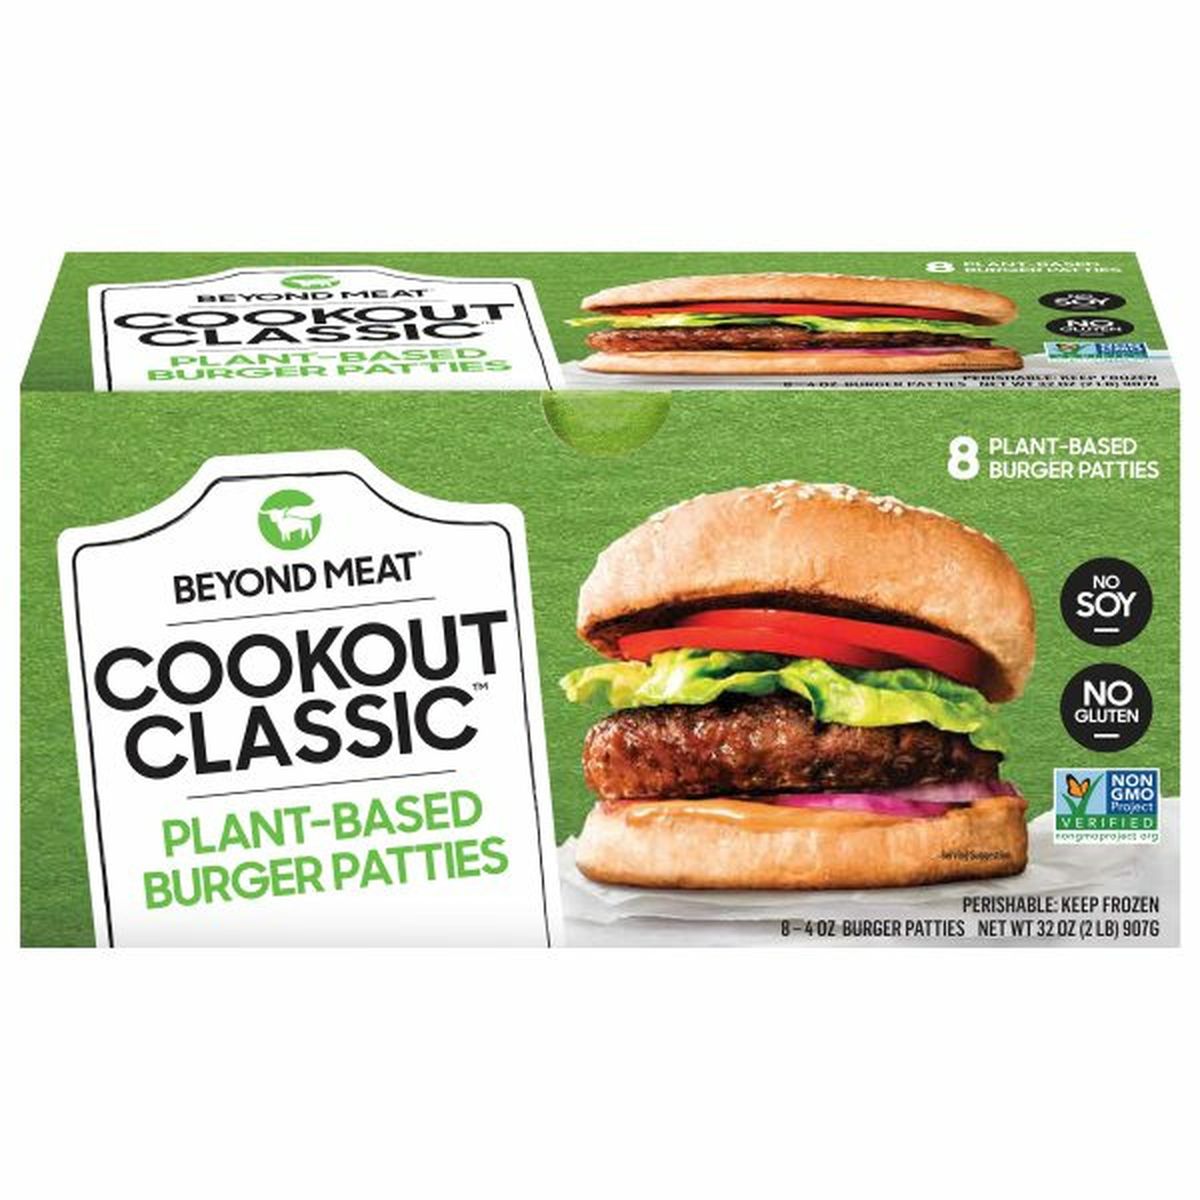 Calories in Beyond Meat Cookout Classic Burger Patties, Plant-Based